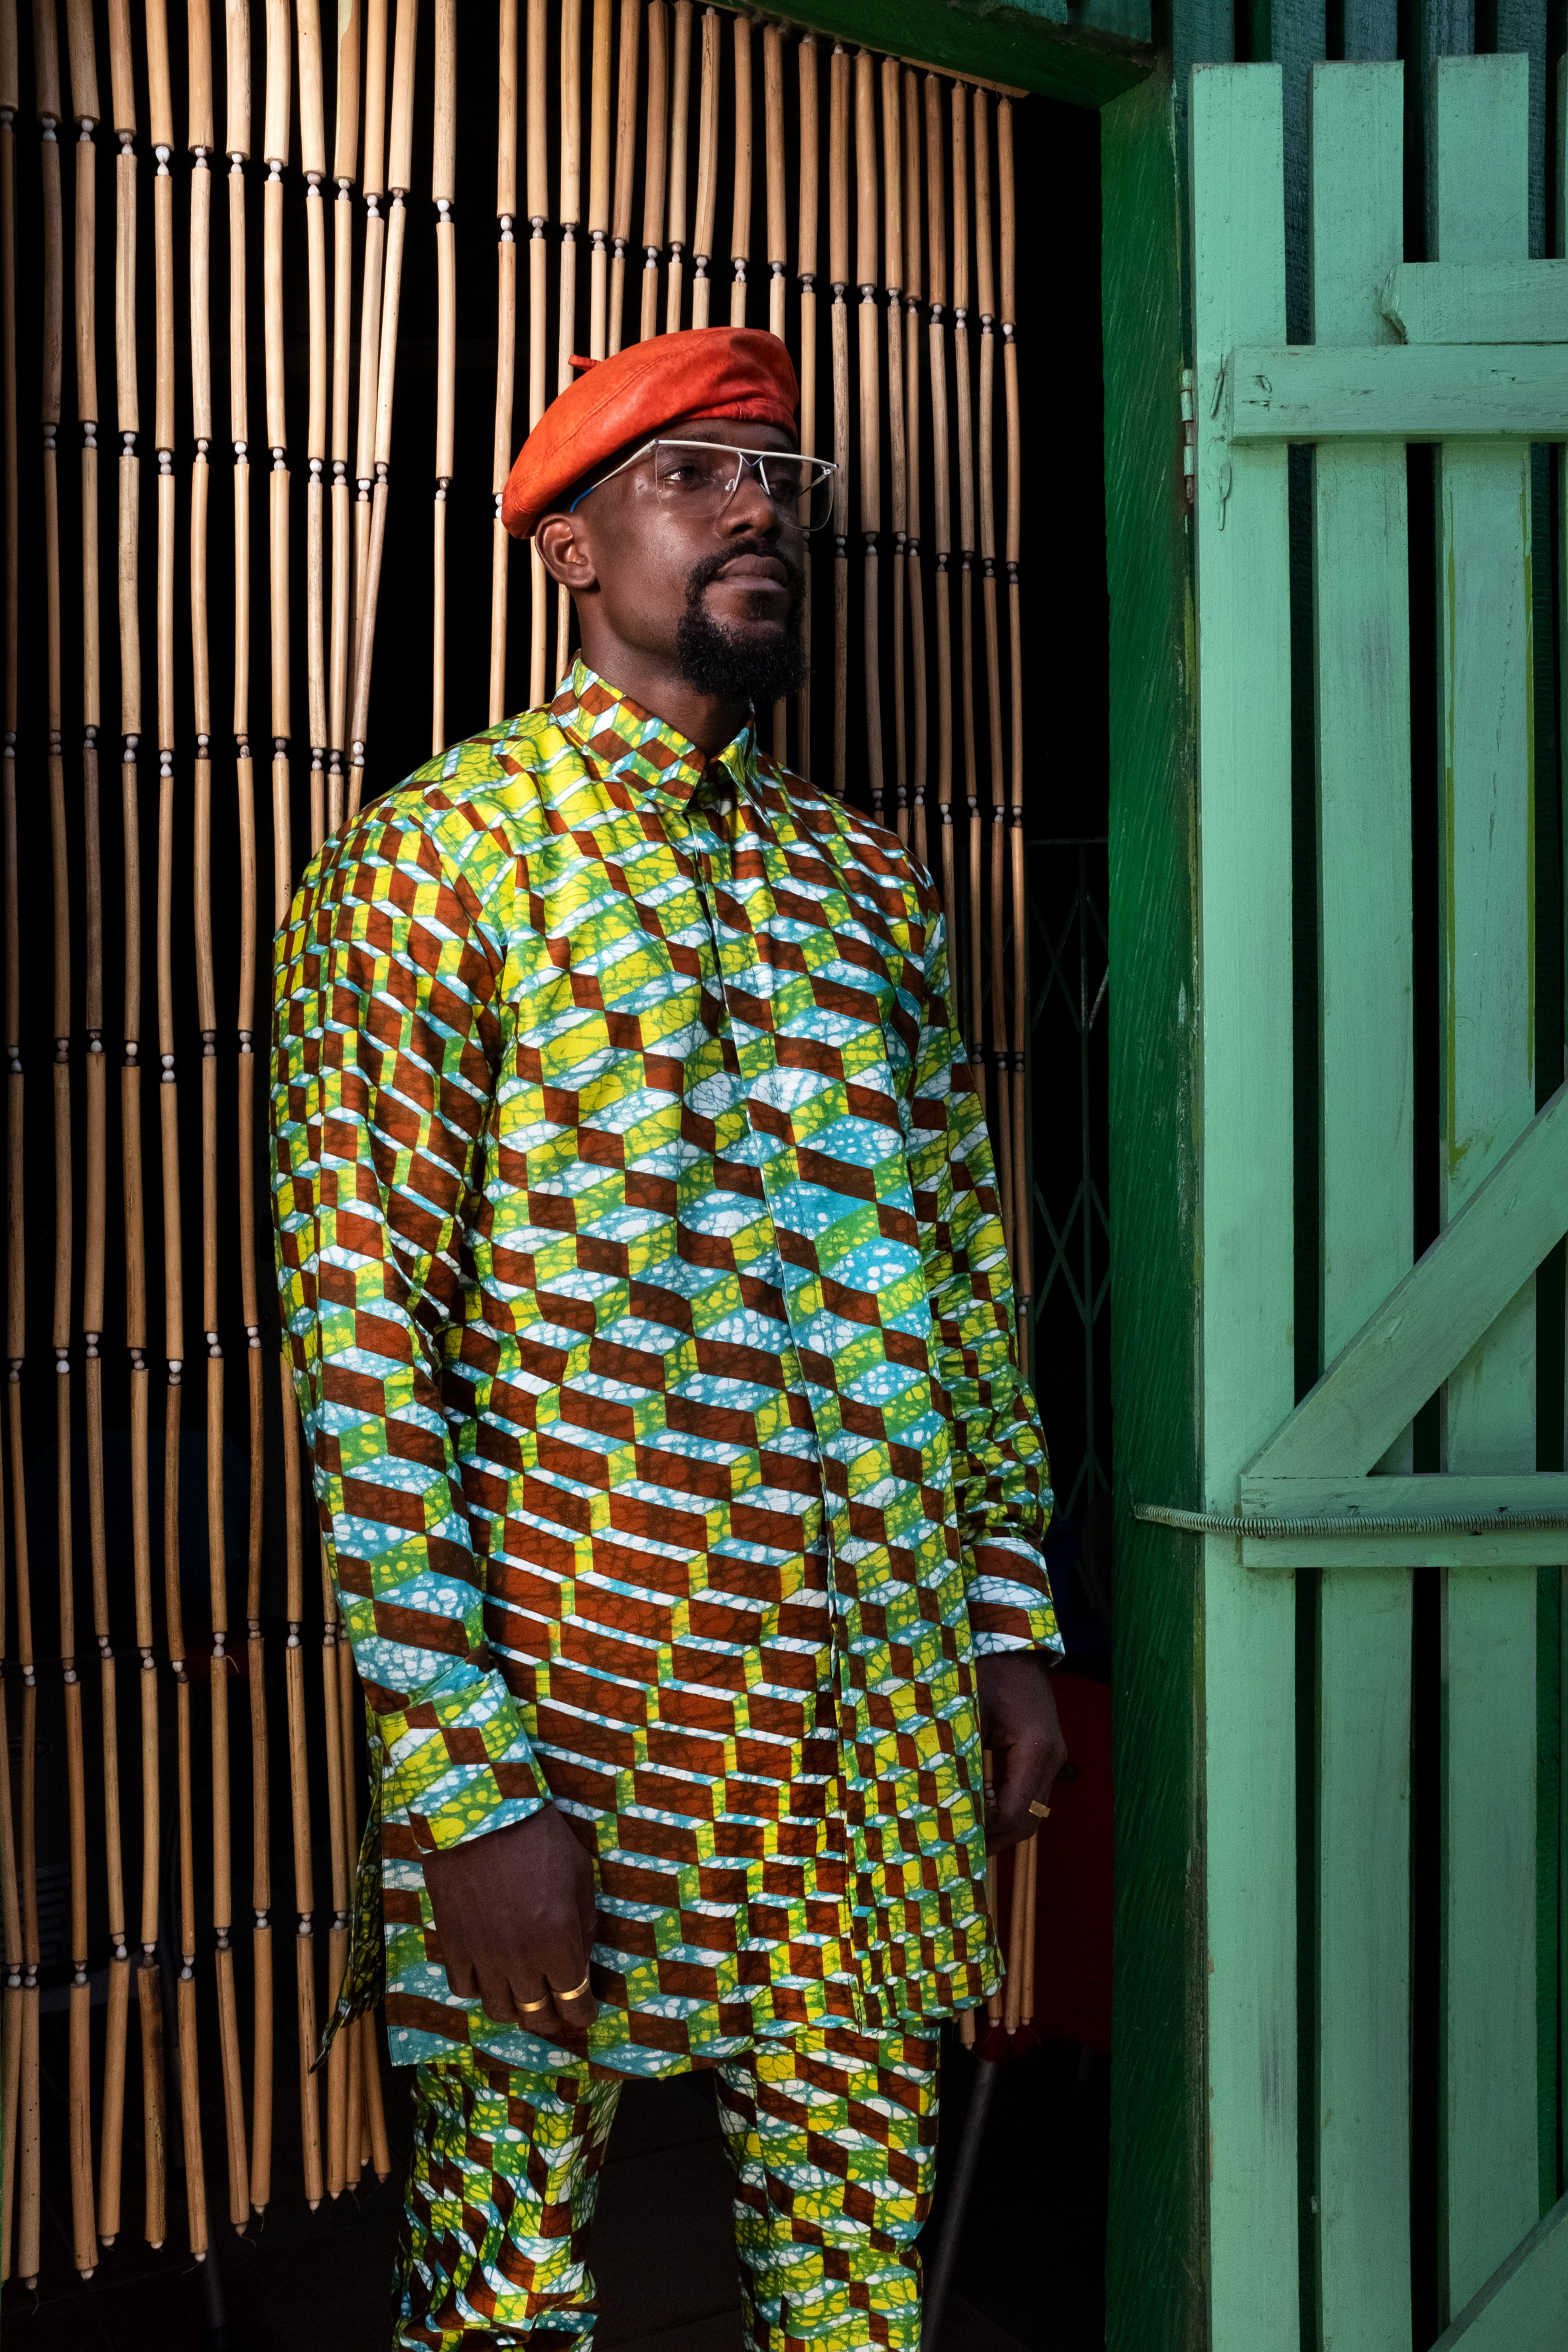 Bubble Block Wax by Simone Post and Atto Tetteh for Vlisco